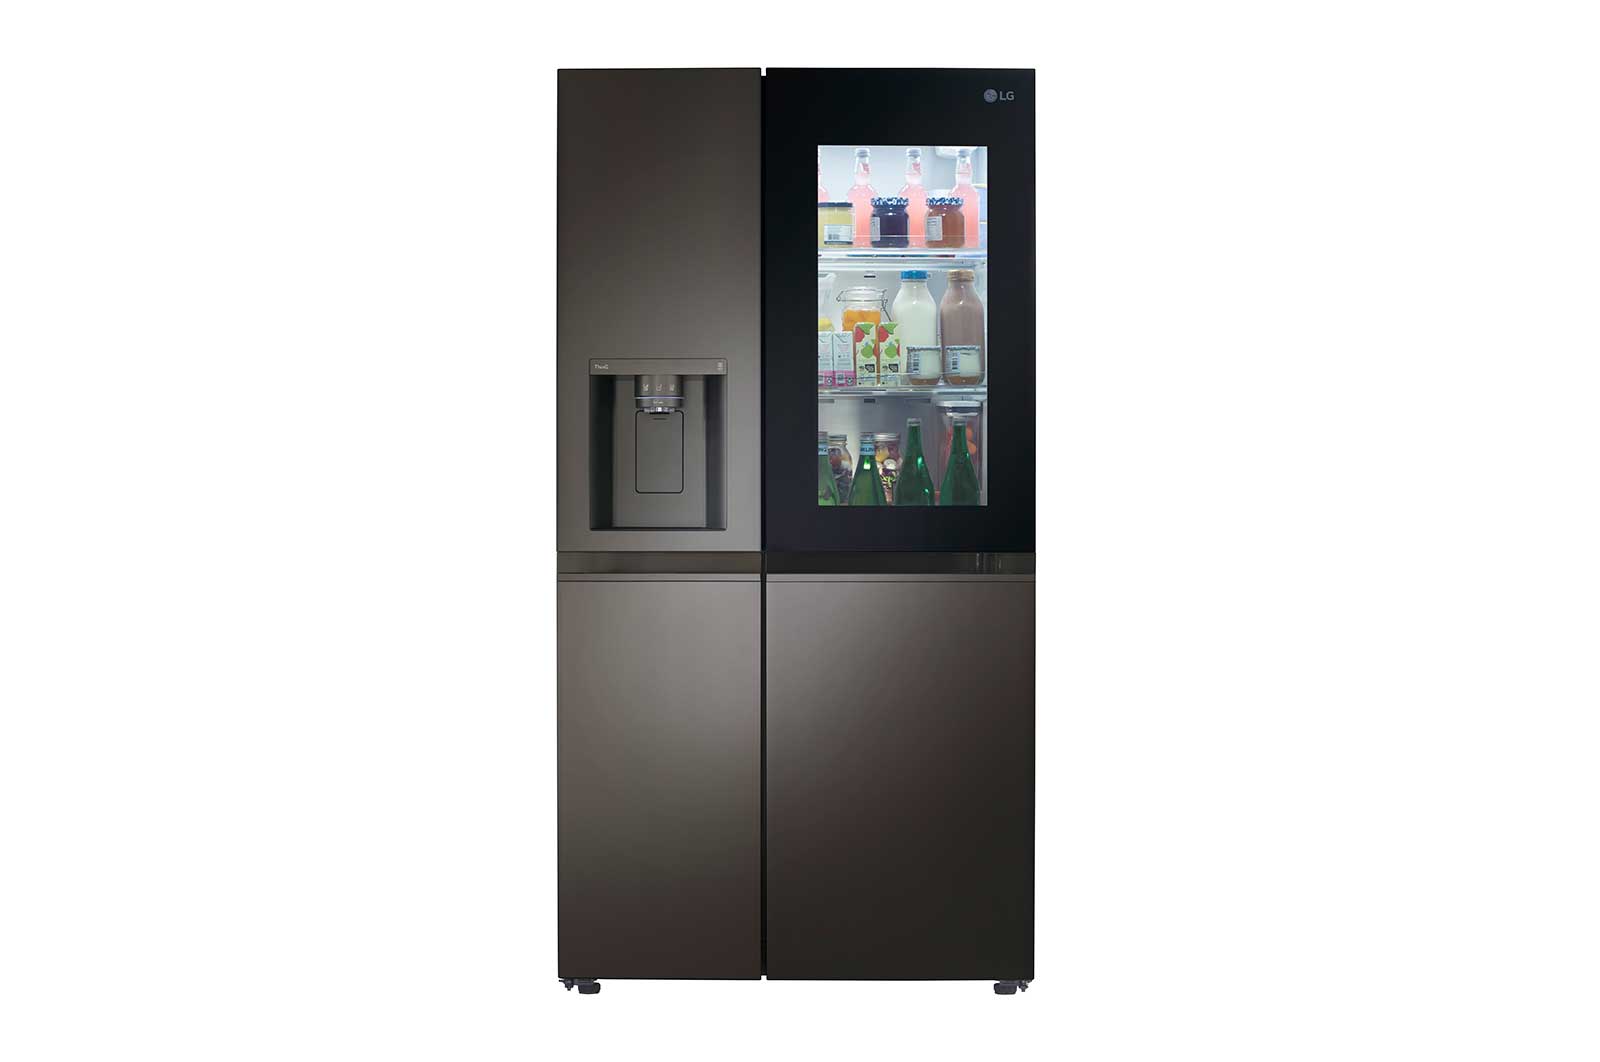 Knock on LG's 'InstaView' fridge and it'll show you your groceries 